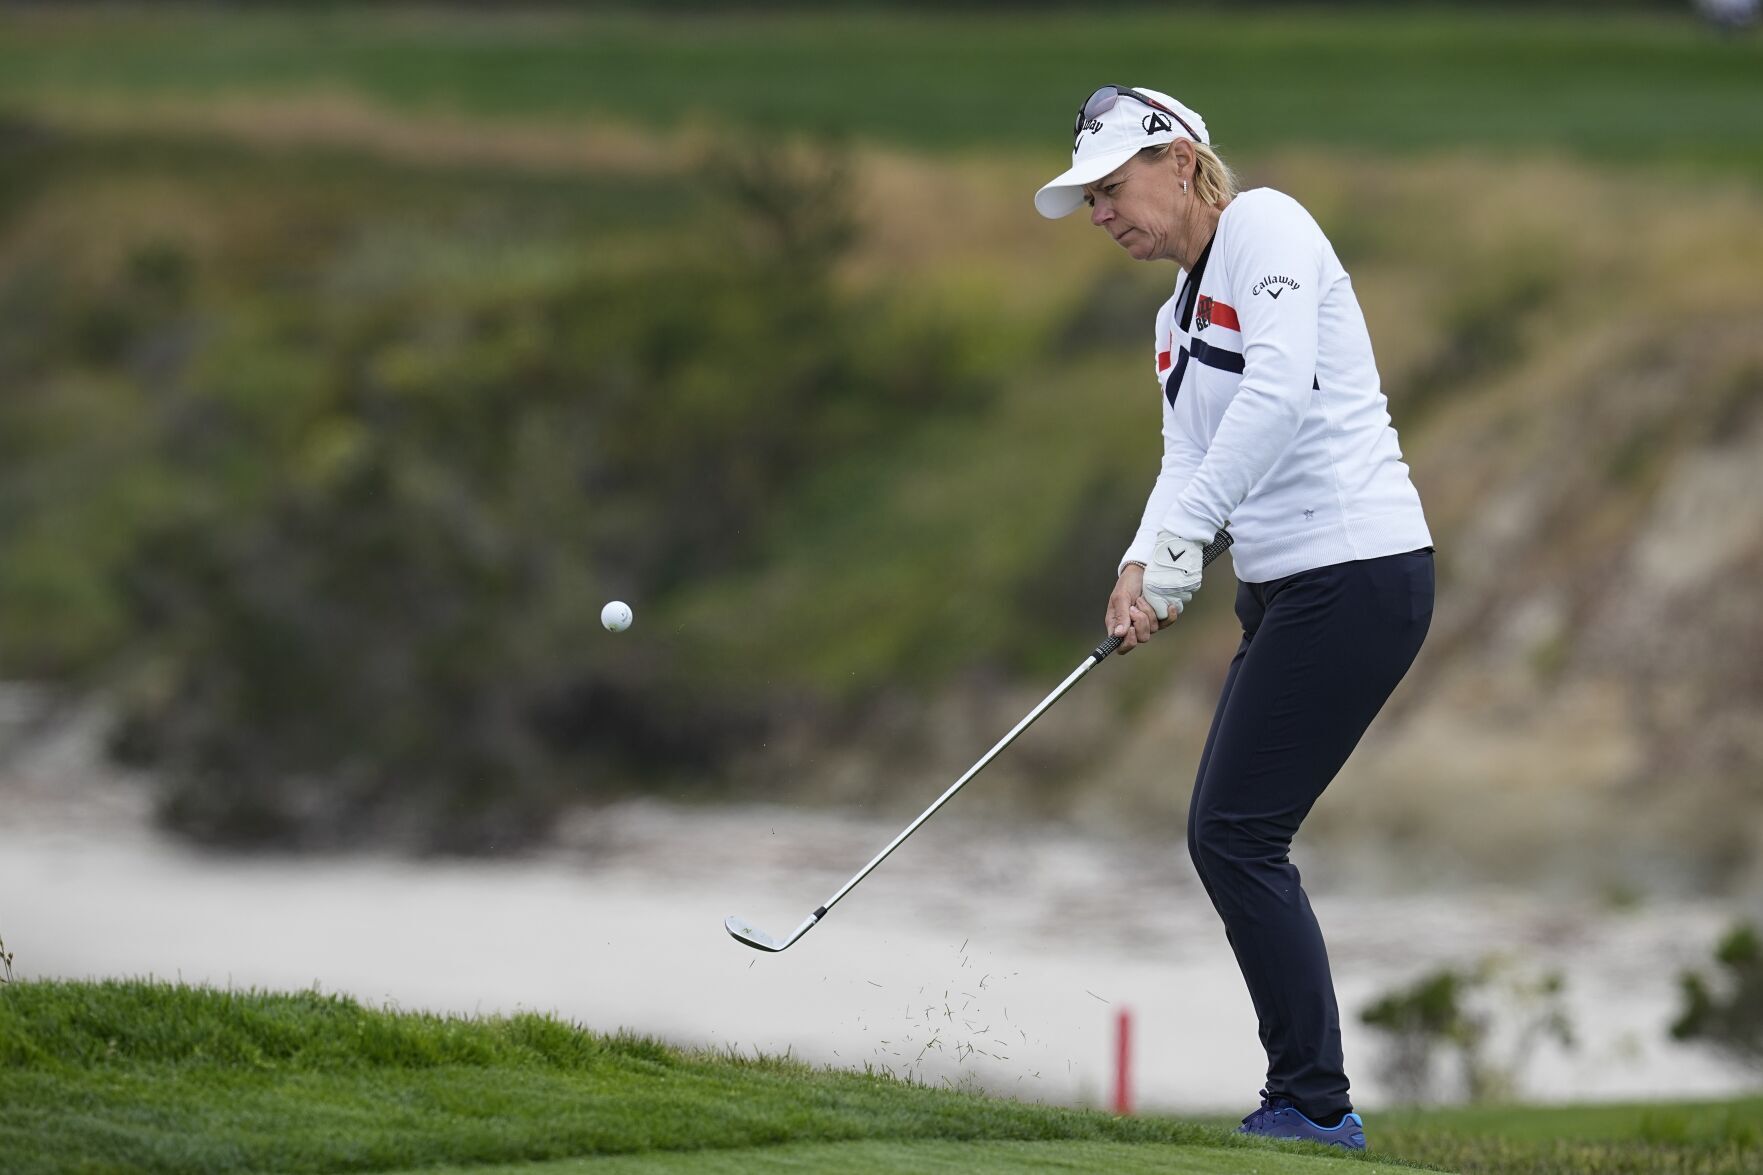 Best female golfers aim for US Open history at Pebble Beach